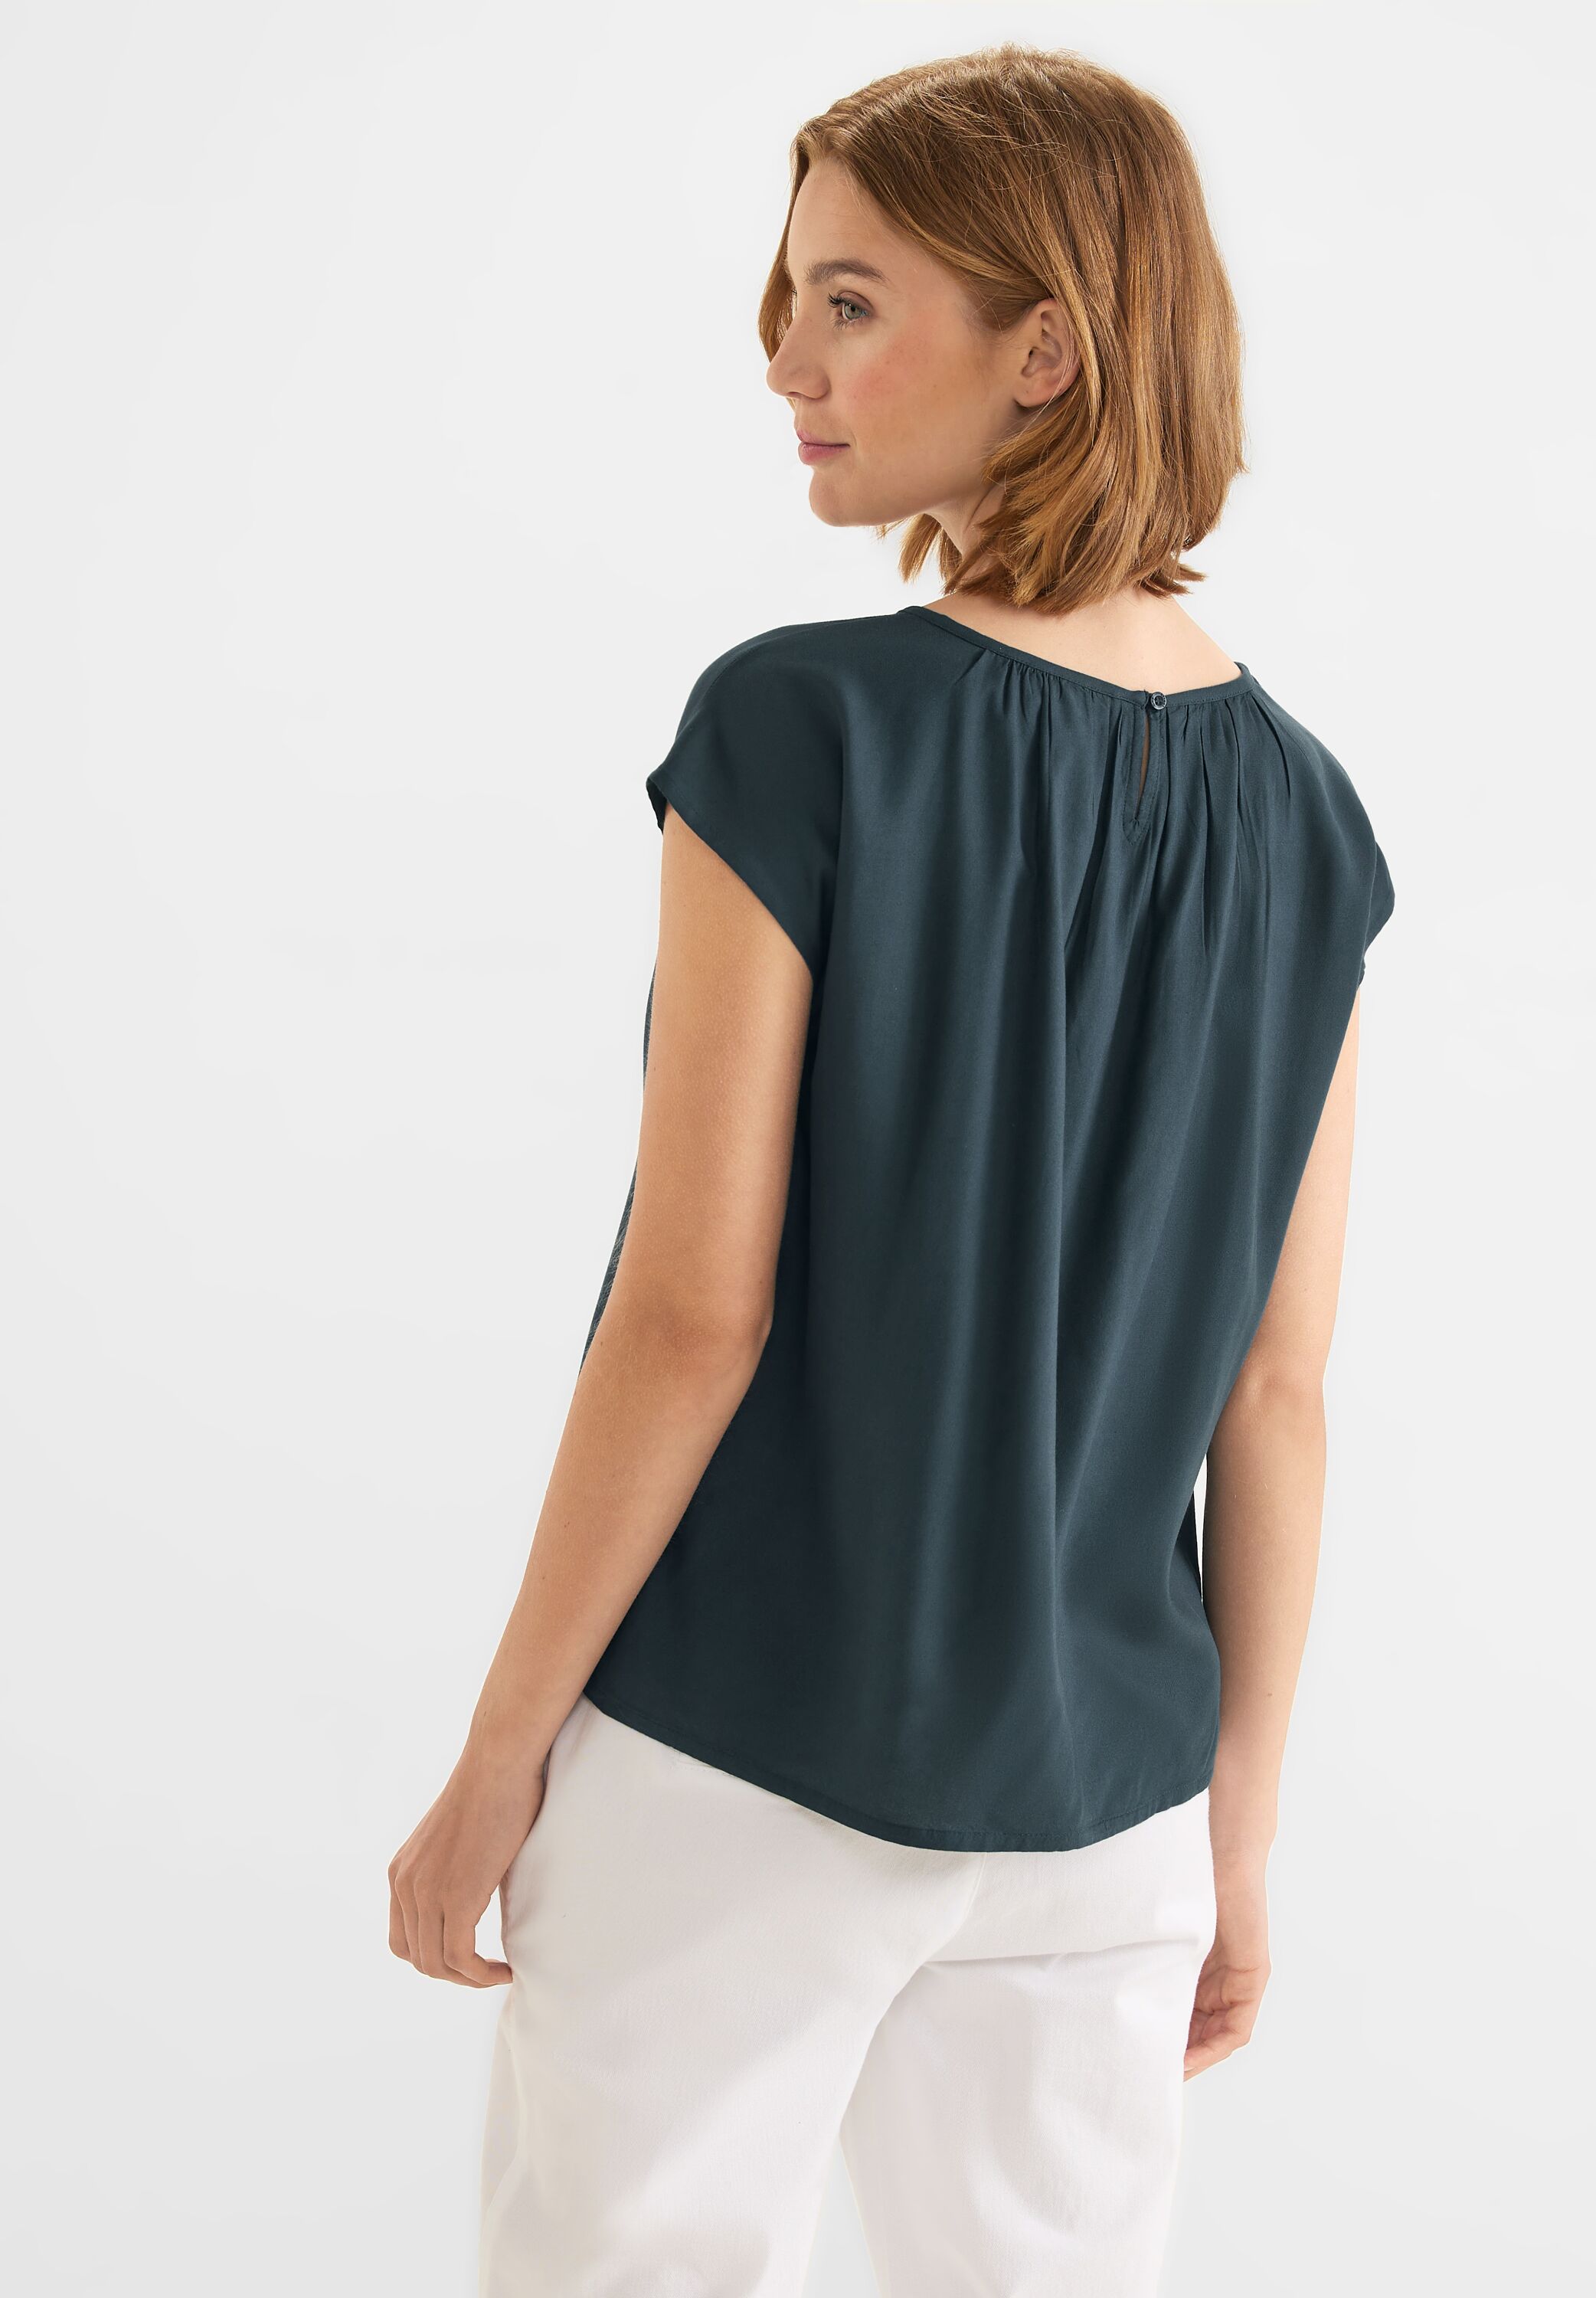 Street One Shirtbluse in Cool Vintage Green im SALE reduziert A343920-13825  - CONCEPT Mode